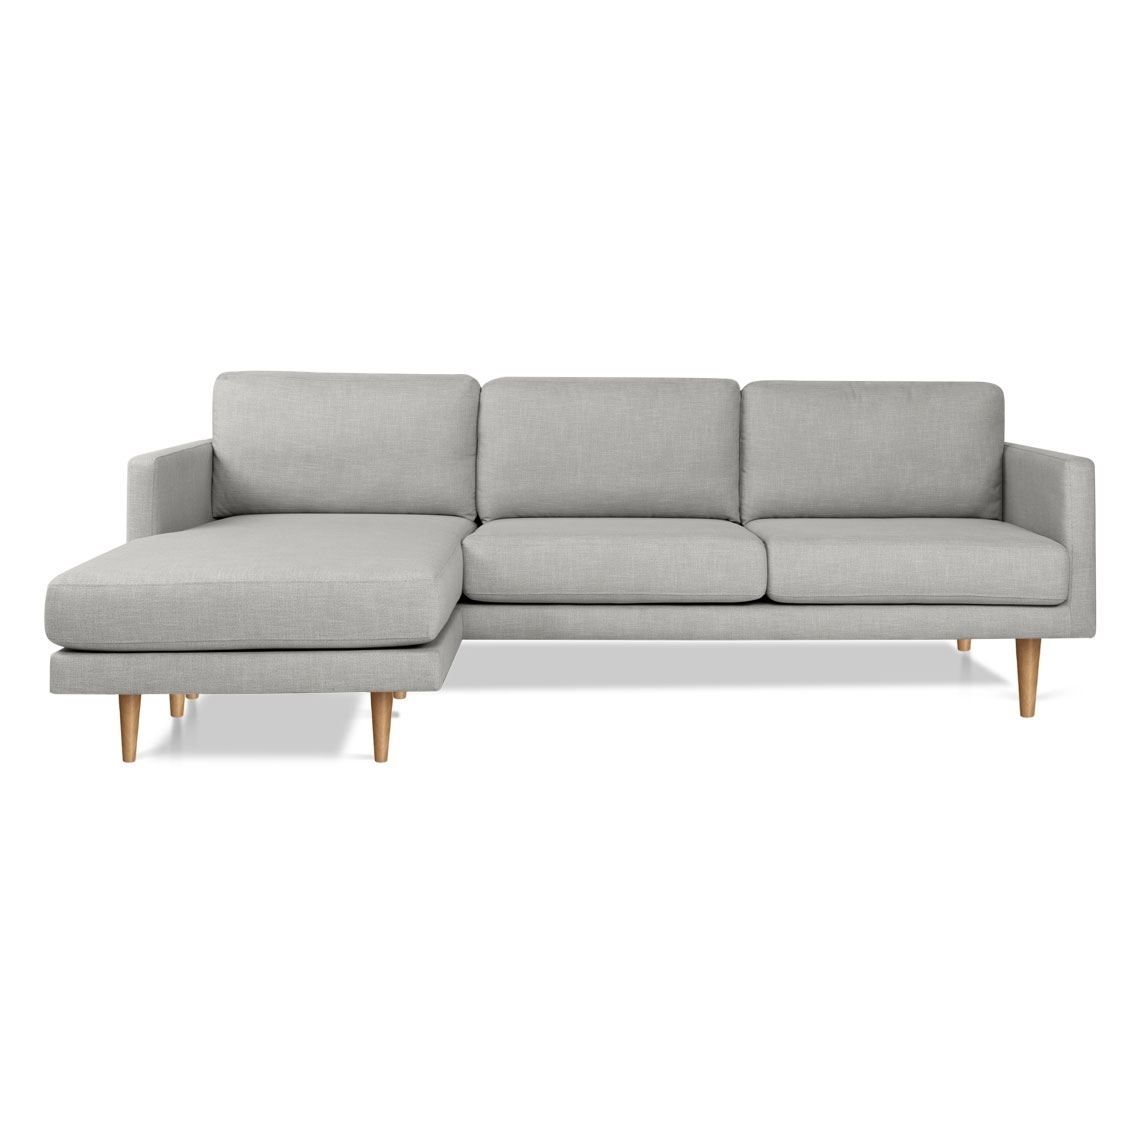 Modular Sofas | Modular Couches & Furniture | Freedom For Aspen 2 Piece Sectionals With Laf Chaise (Photo 14 of 30)